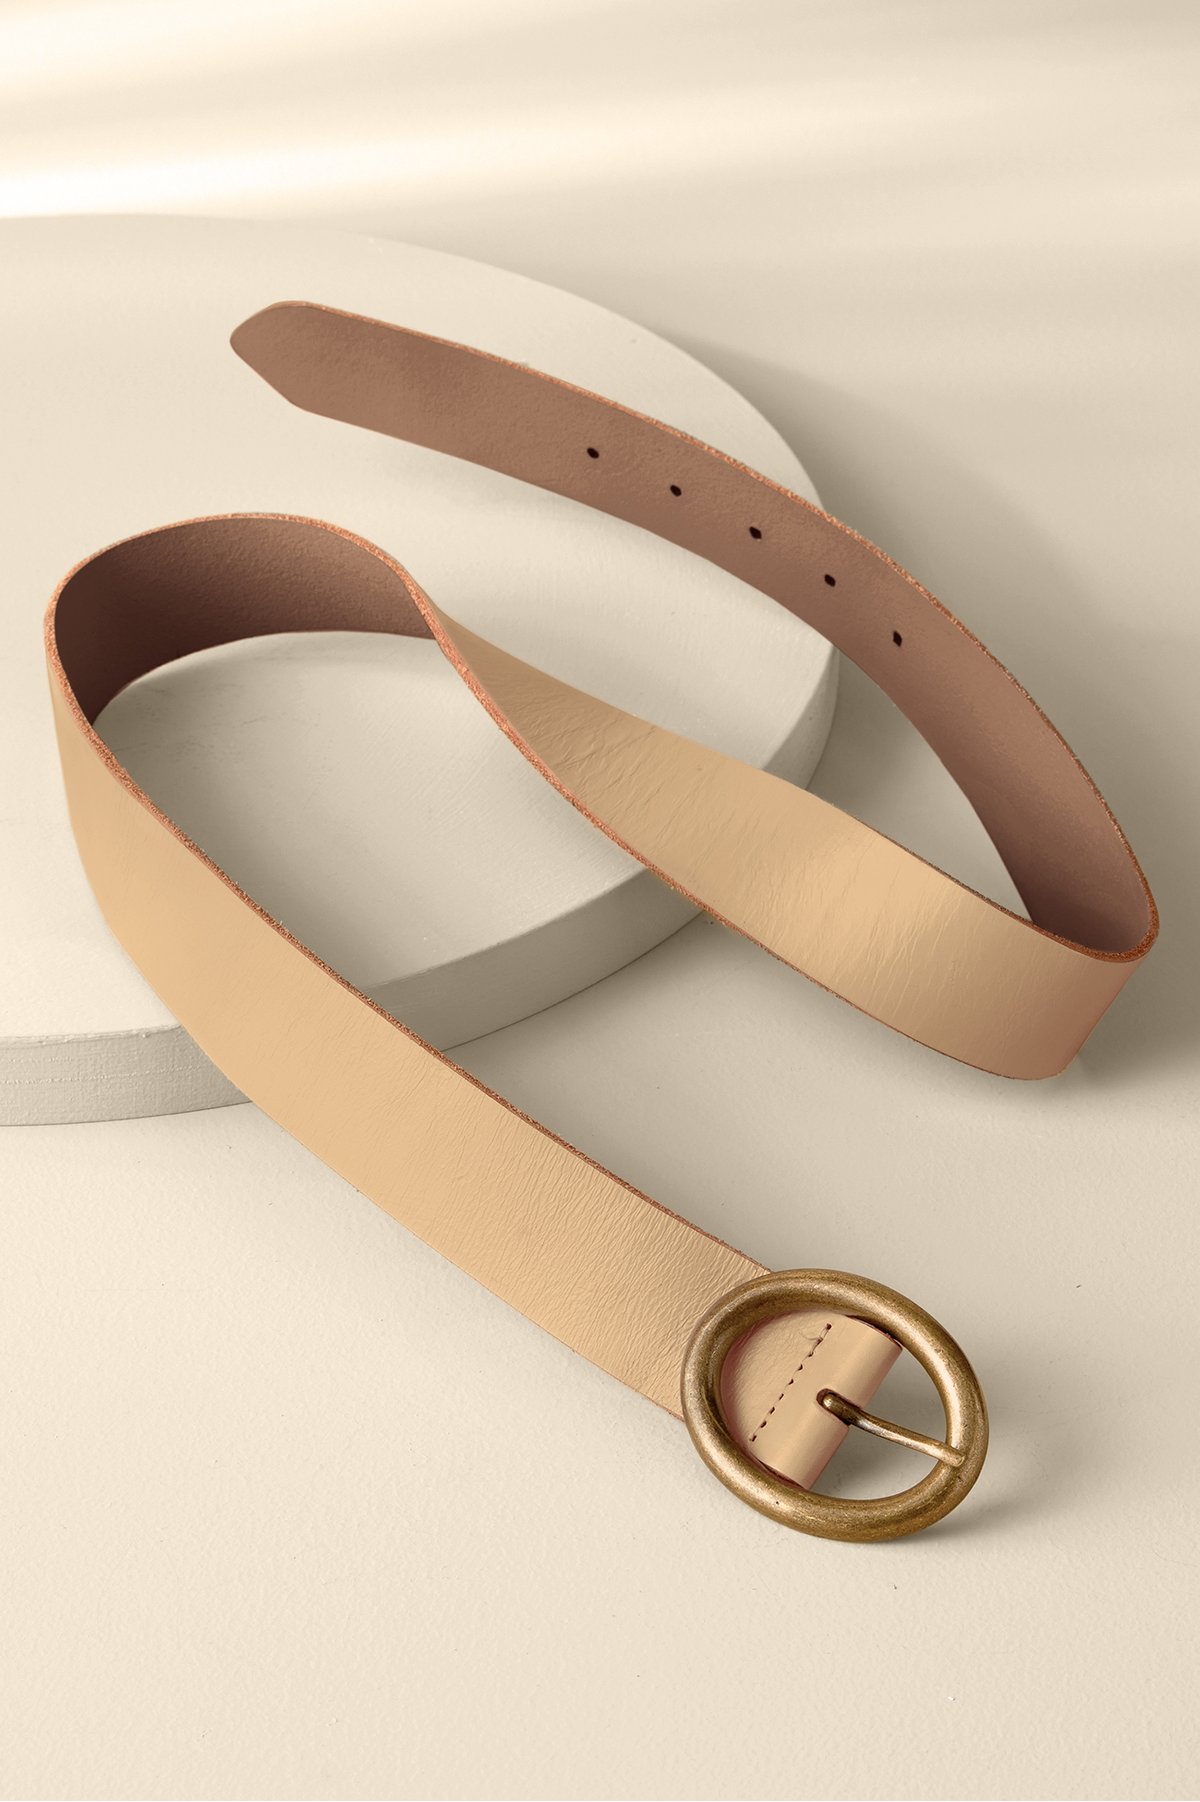 Monaco Leather Belt by Soft Surroundings, in Pale Natural size S (6/8)